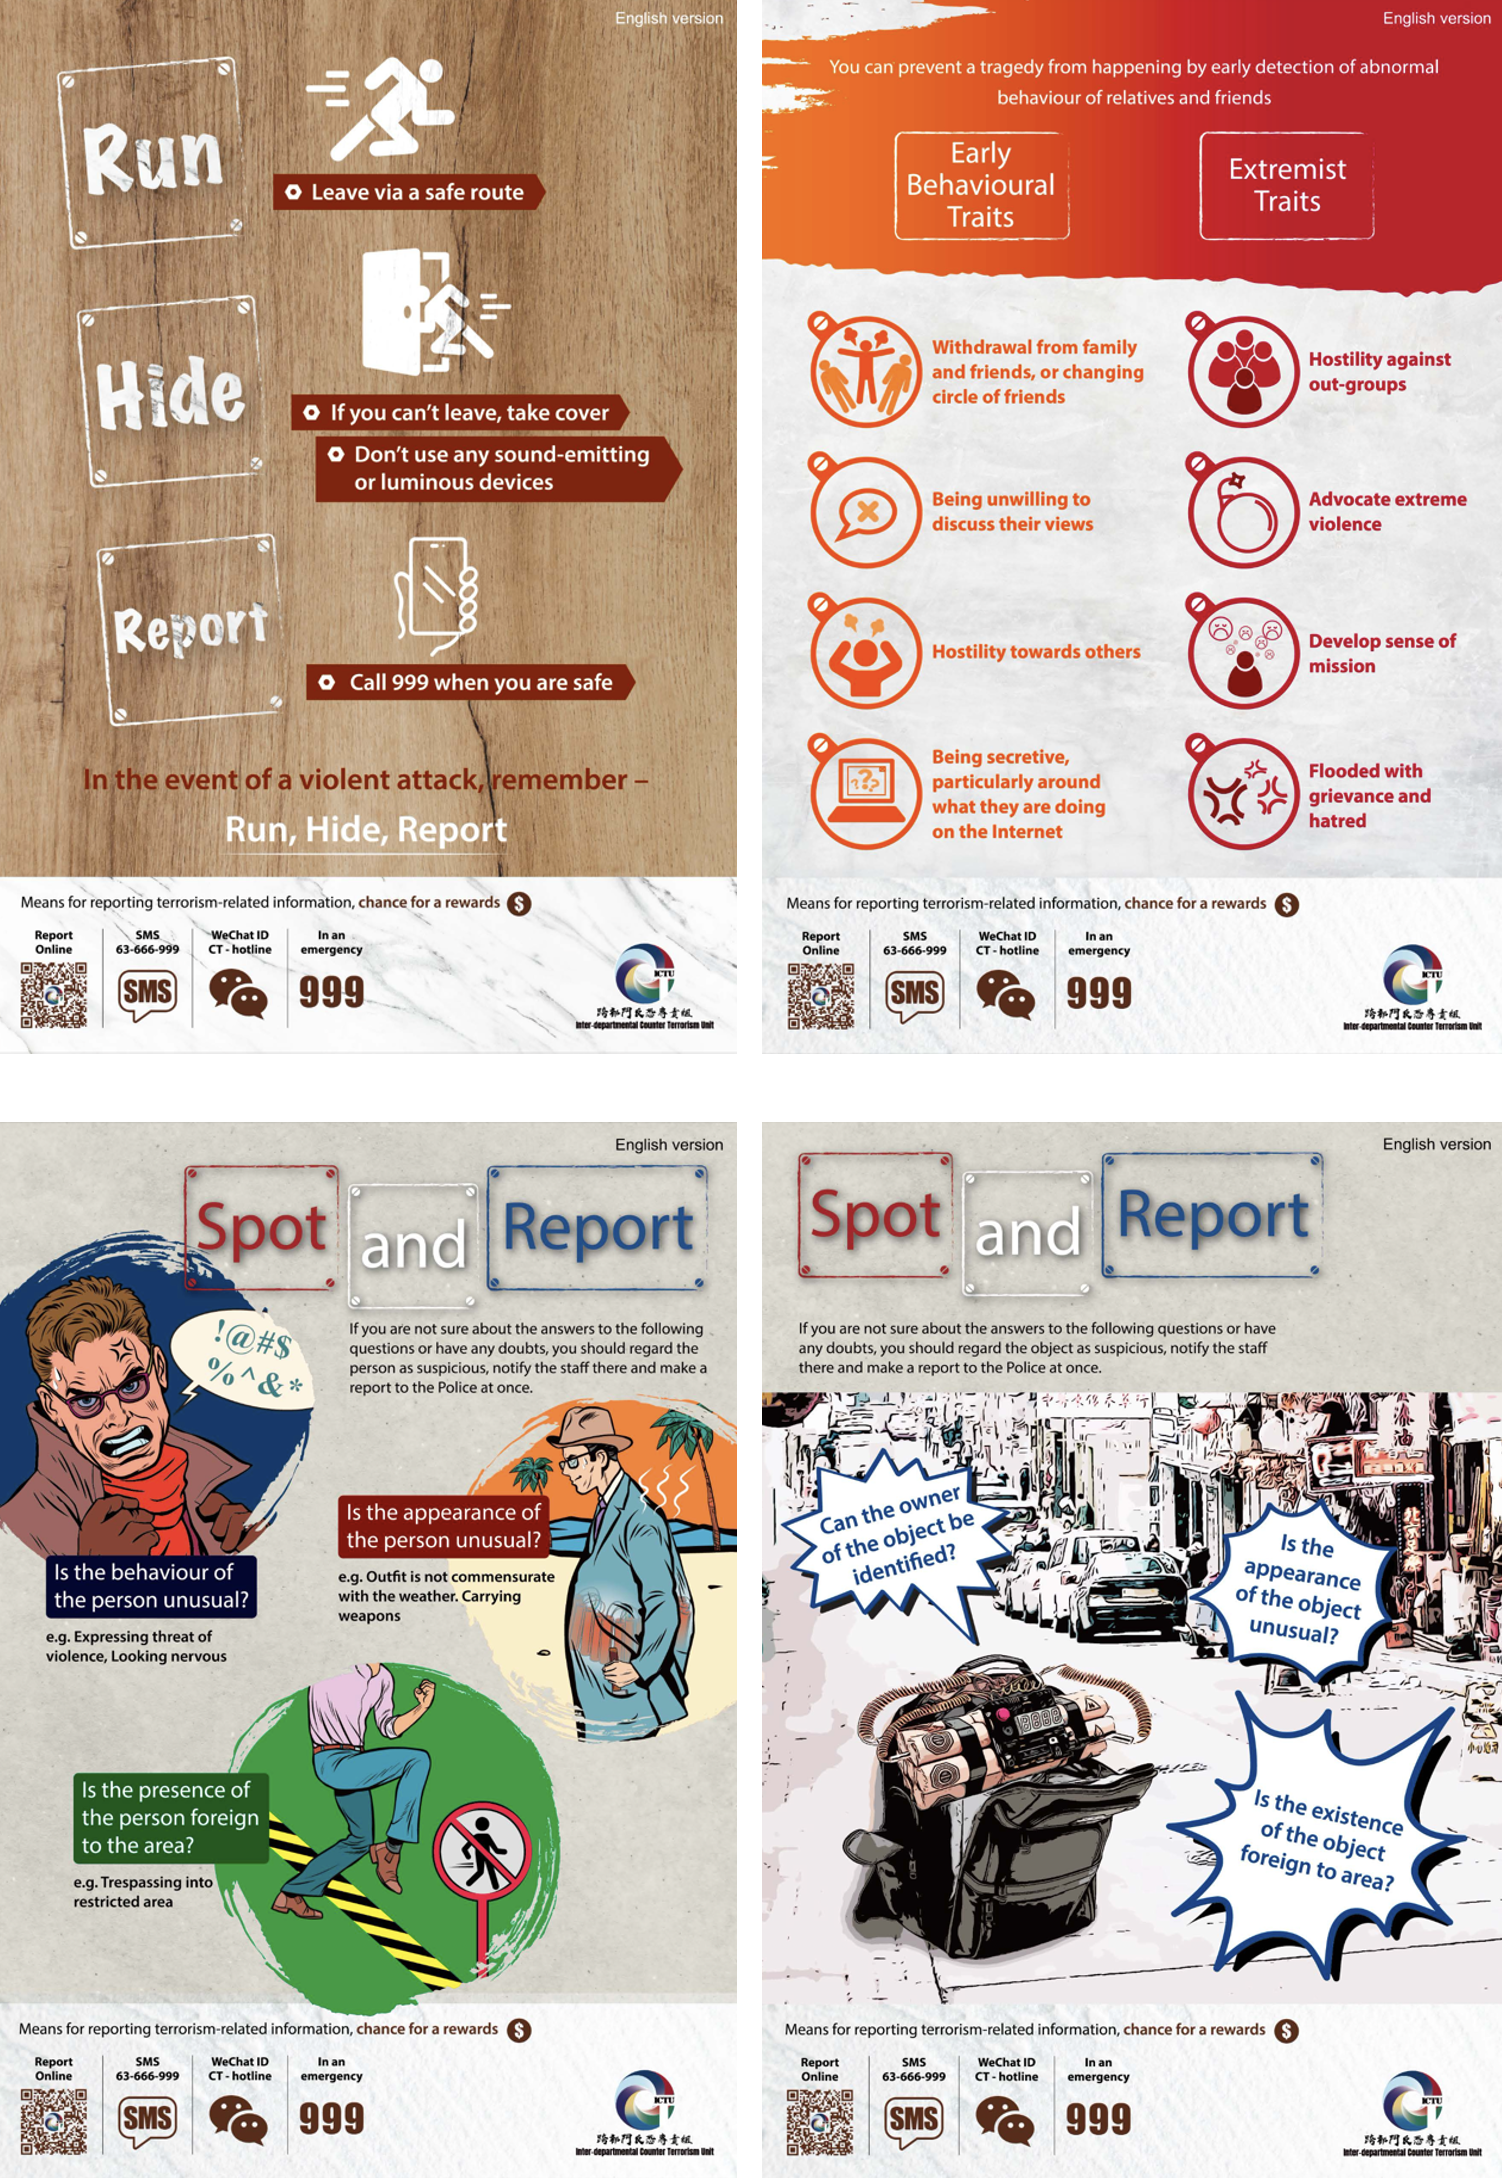 ‘Run, Hide, Report’, ‘Spot and Report – suspicious person’, ‘Spot and Report – suspicious objects’ and ‘Guidelines for identifying Extremist Thoughts’  – English version